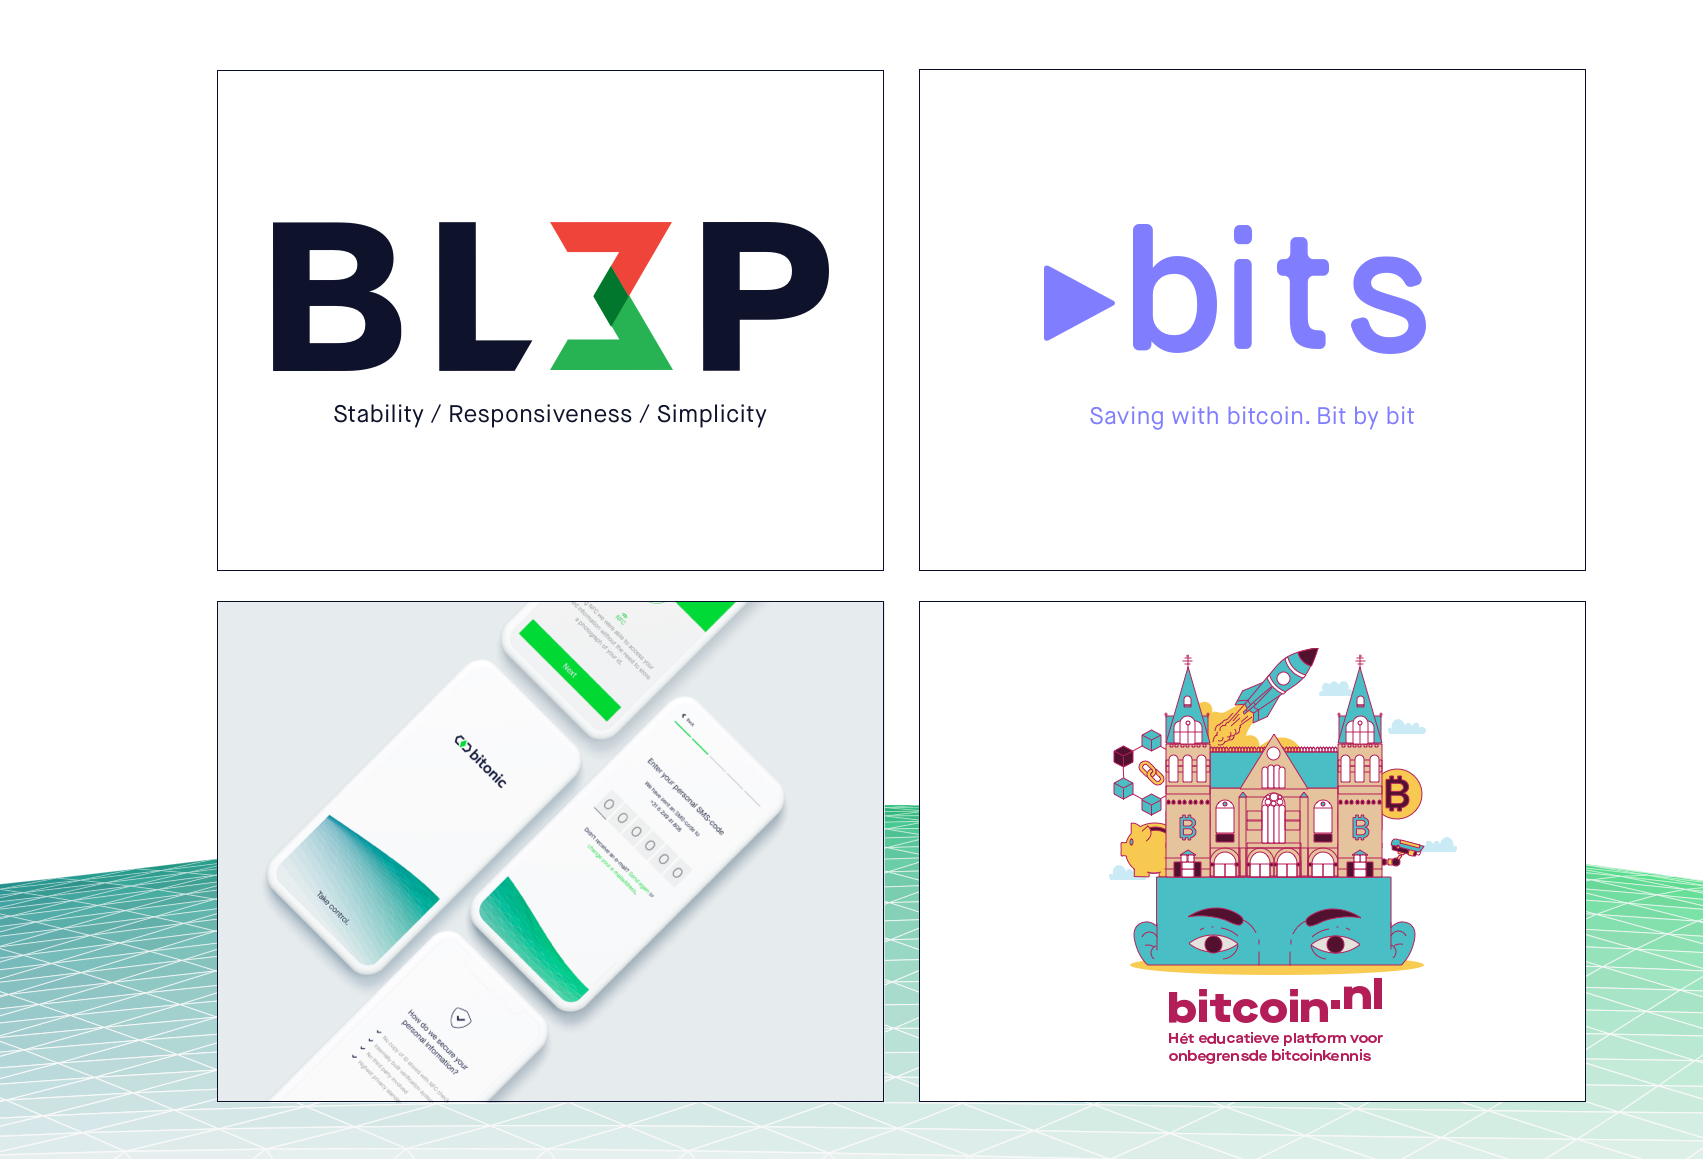 The services and products of Bitonic